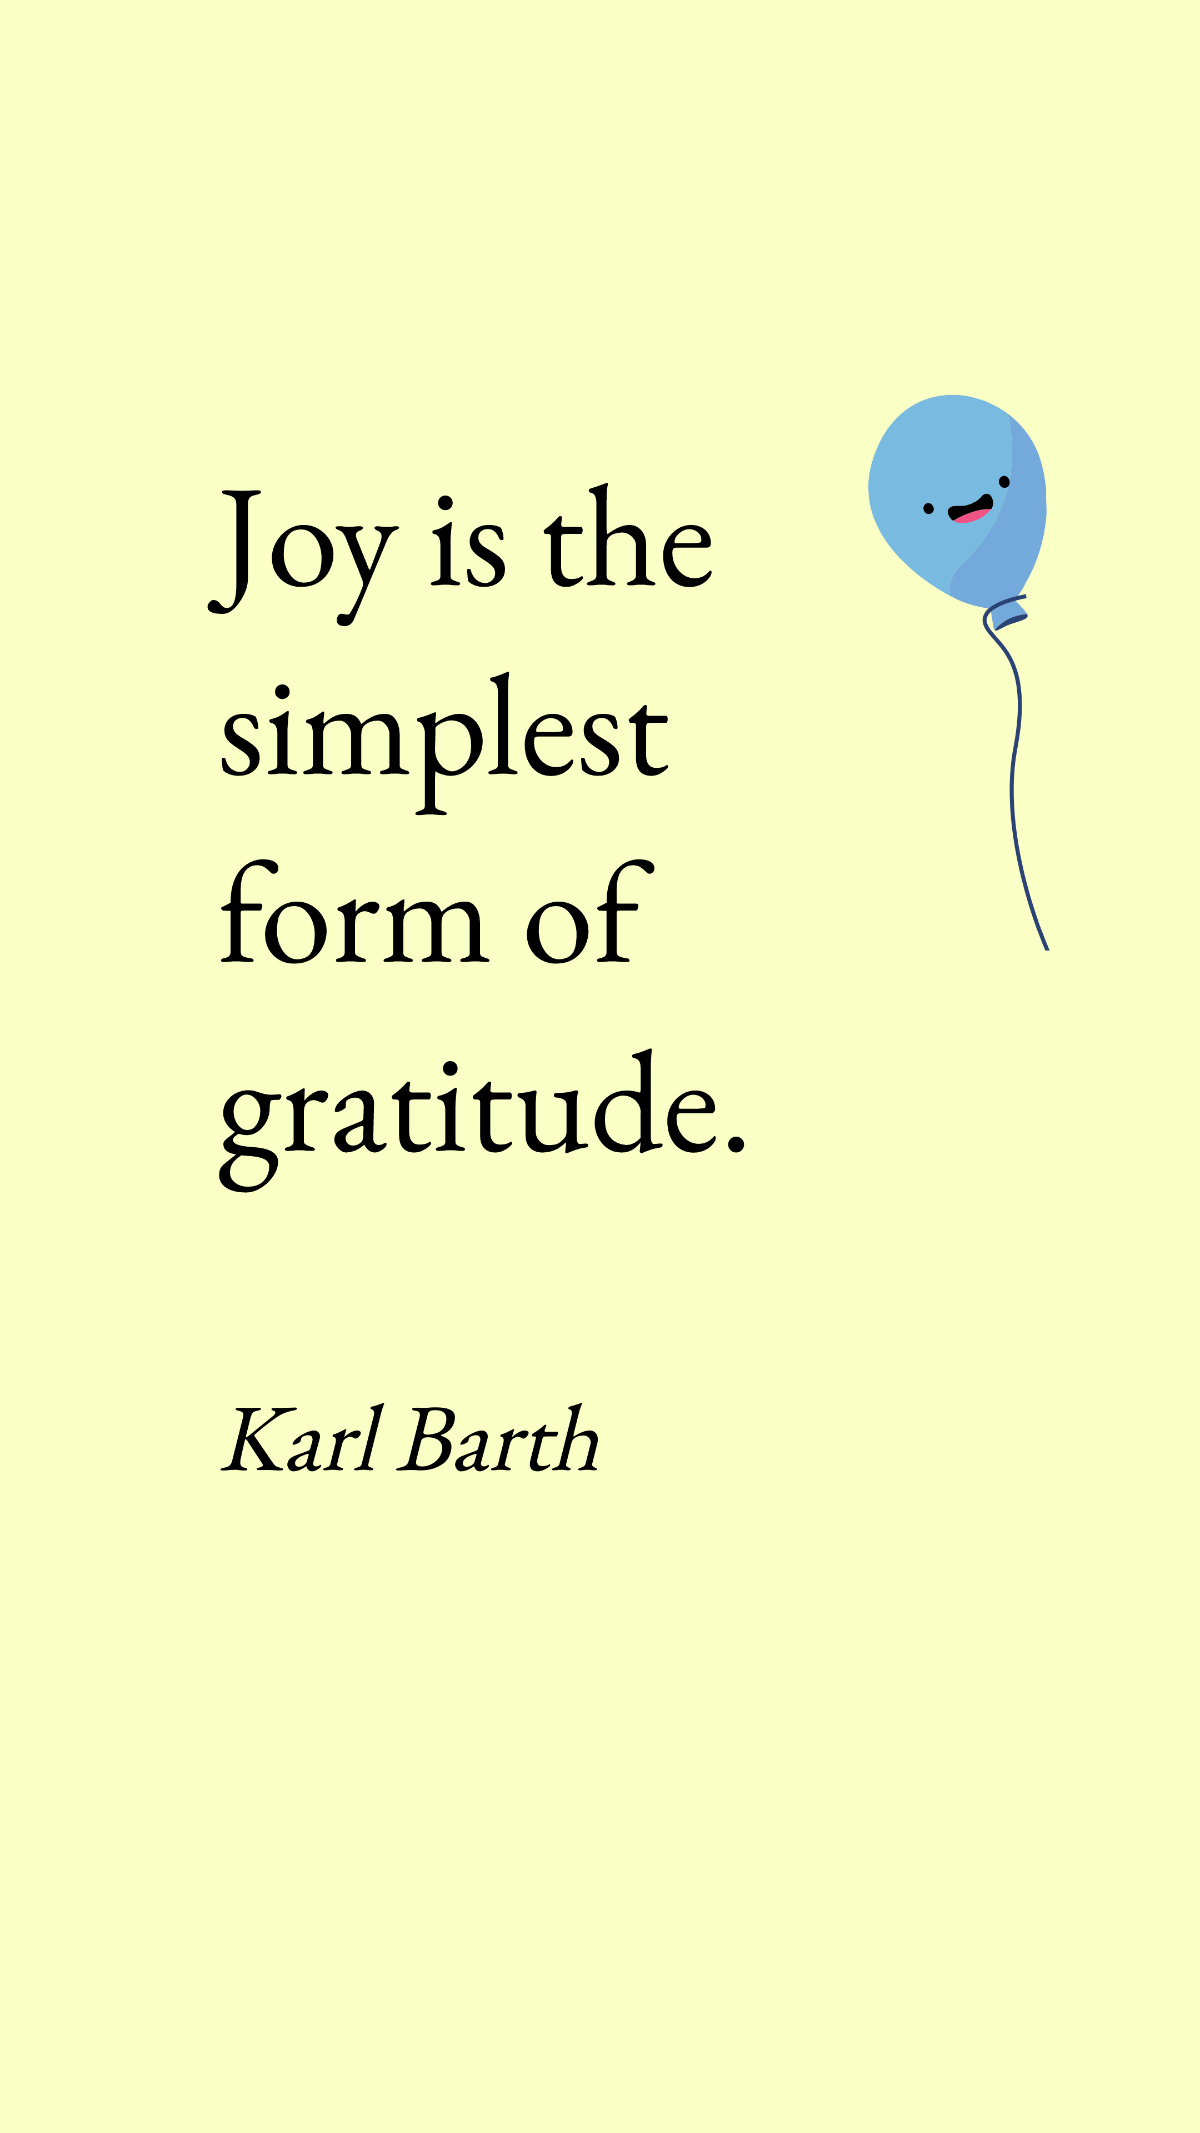 Free Karl Barth - Joy is the simplest form of gratitude.  Template